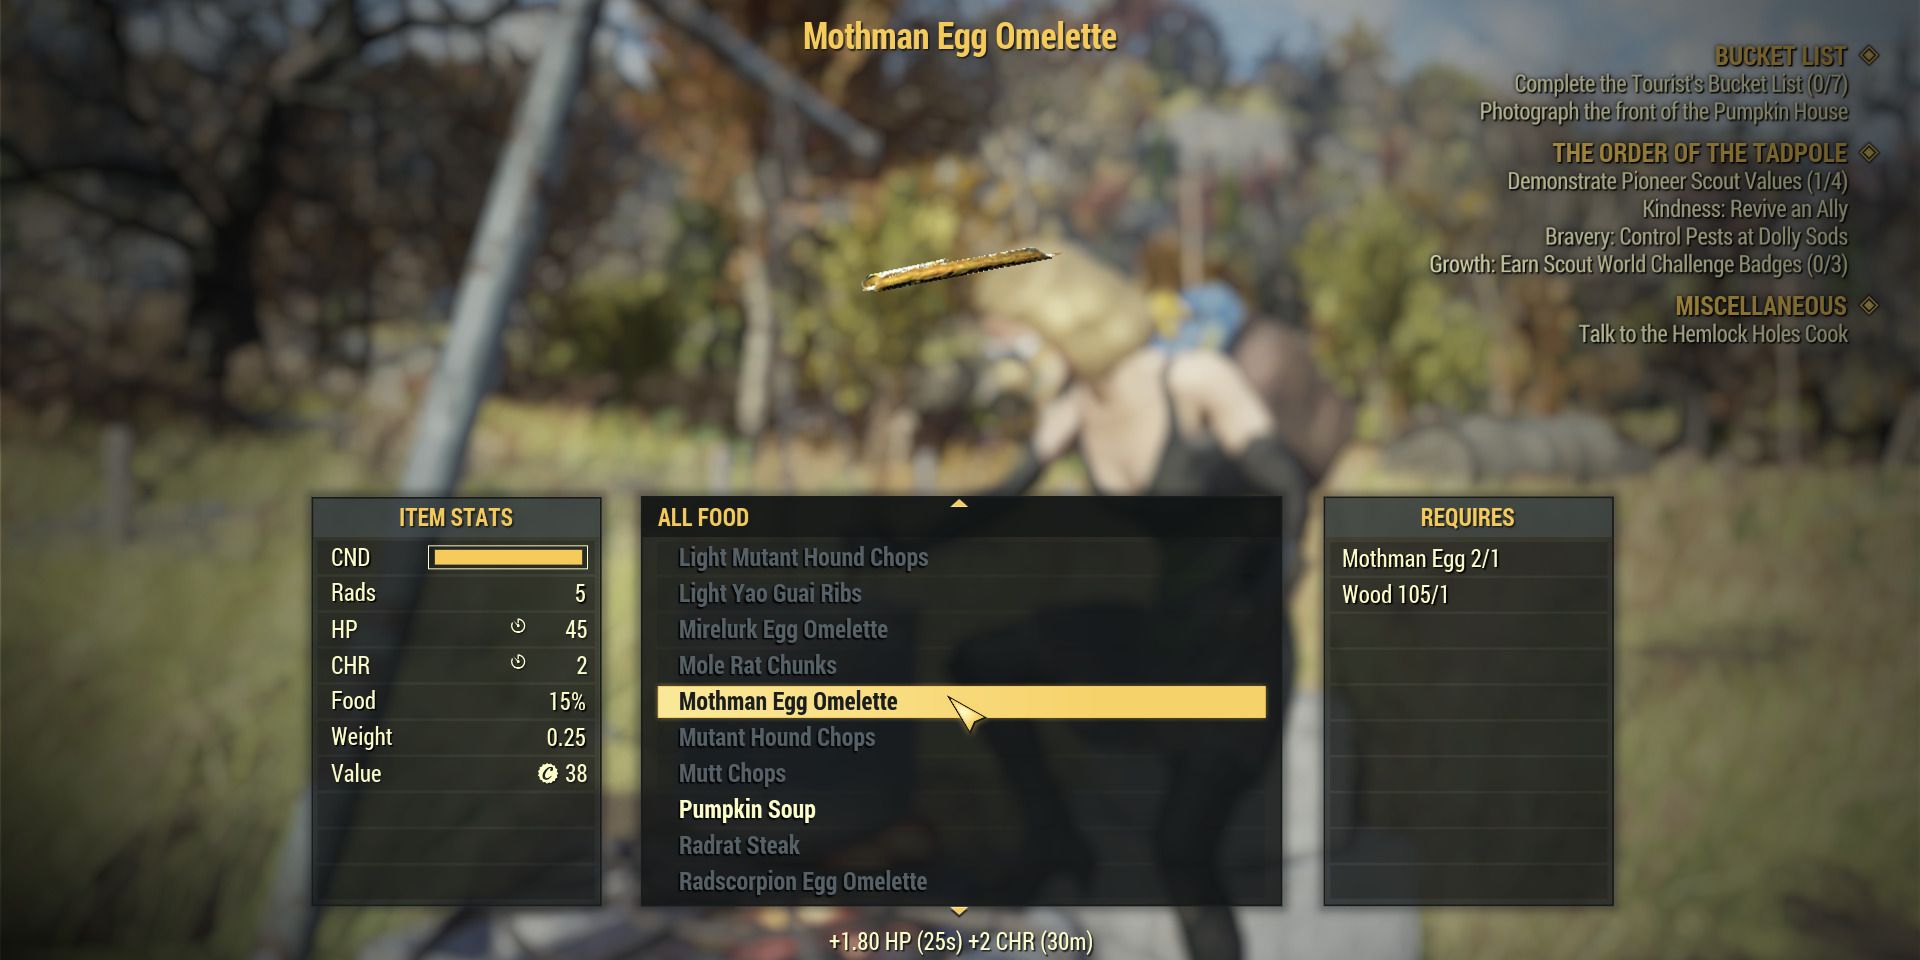 Image of the mothman egg omelette recipe in Fallout 76